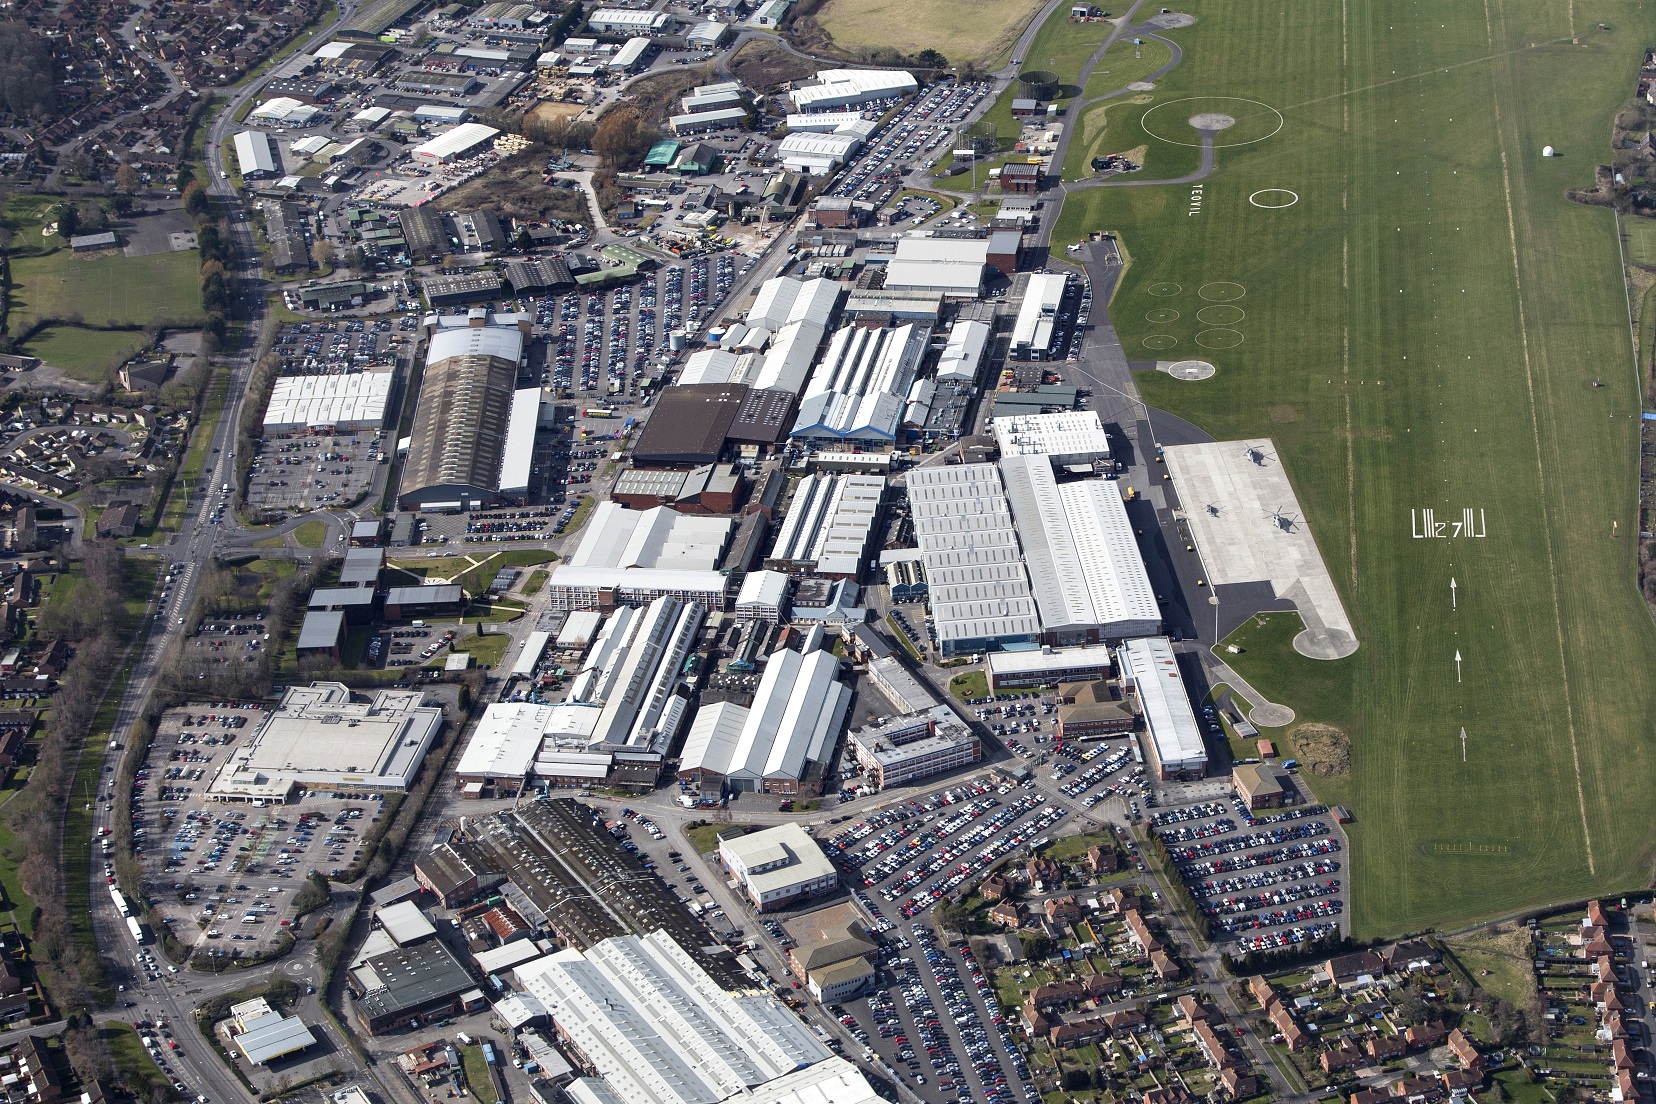 An aerial view of Leonardo Helicopters' Yeovil site